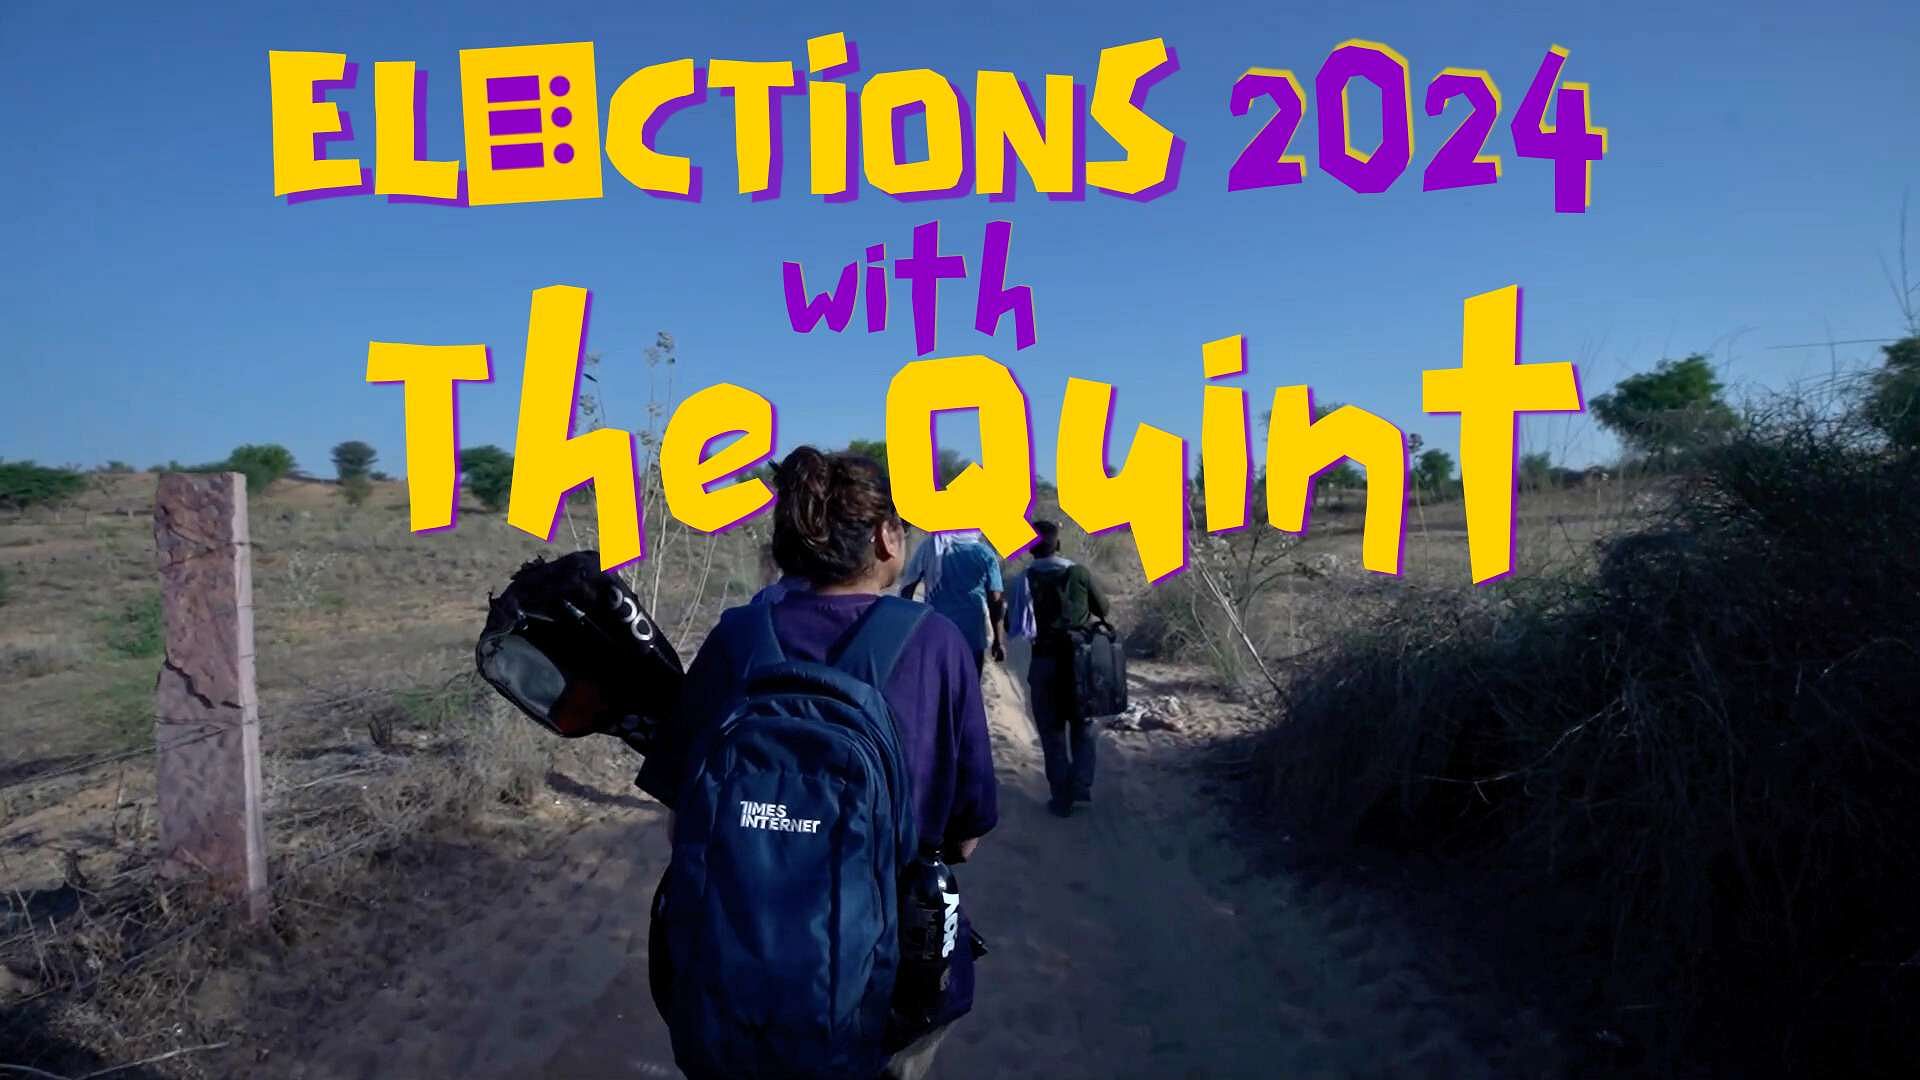 Elections 2024: The Quint's Ground Reports are the Voters' Voice, Your Voice